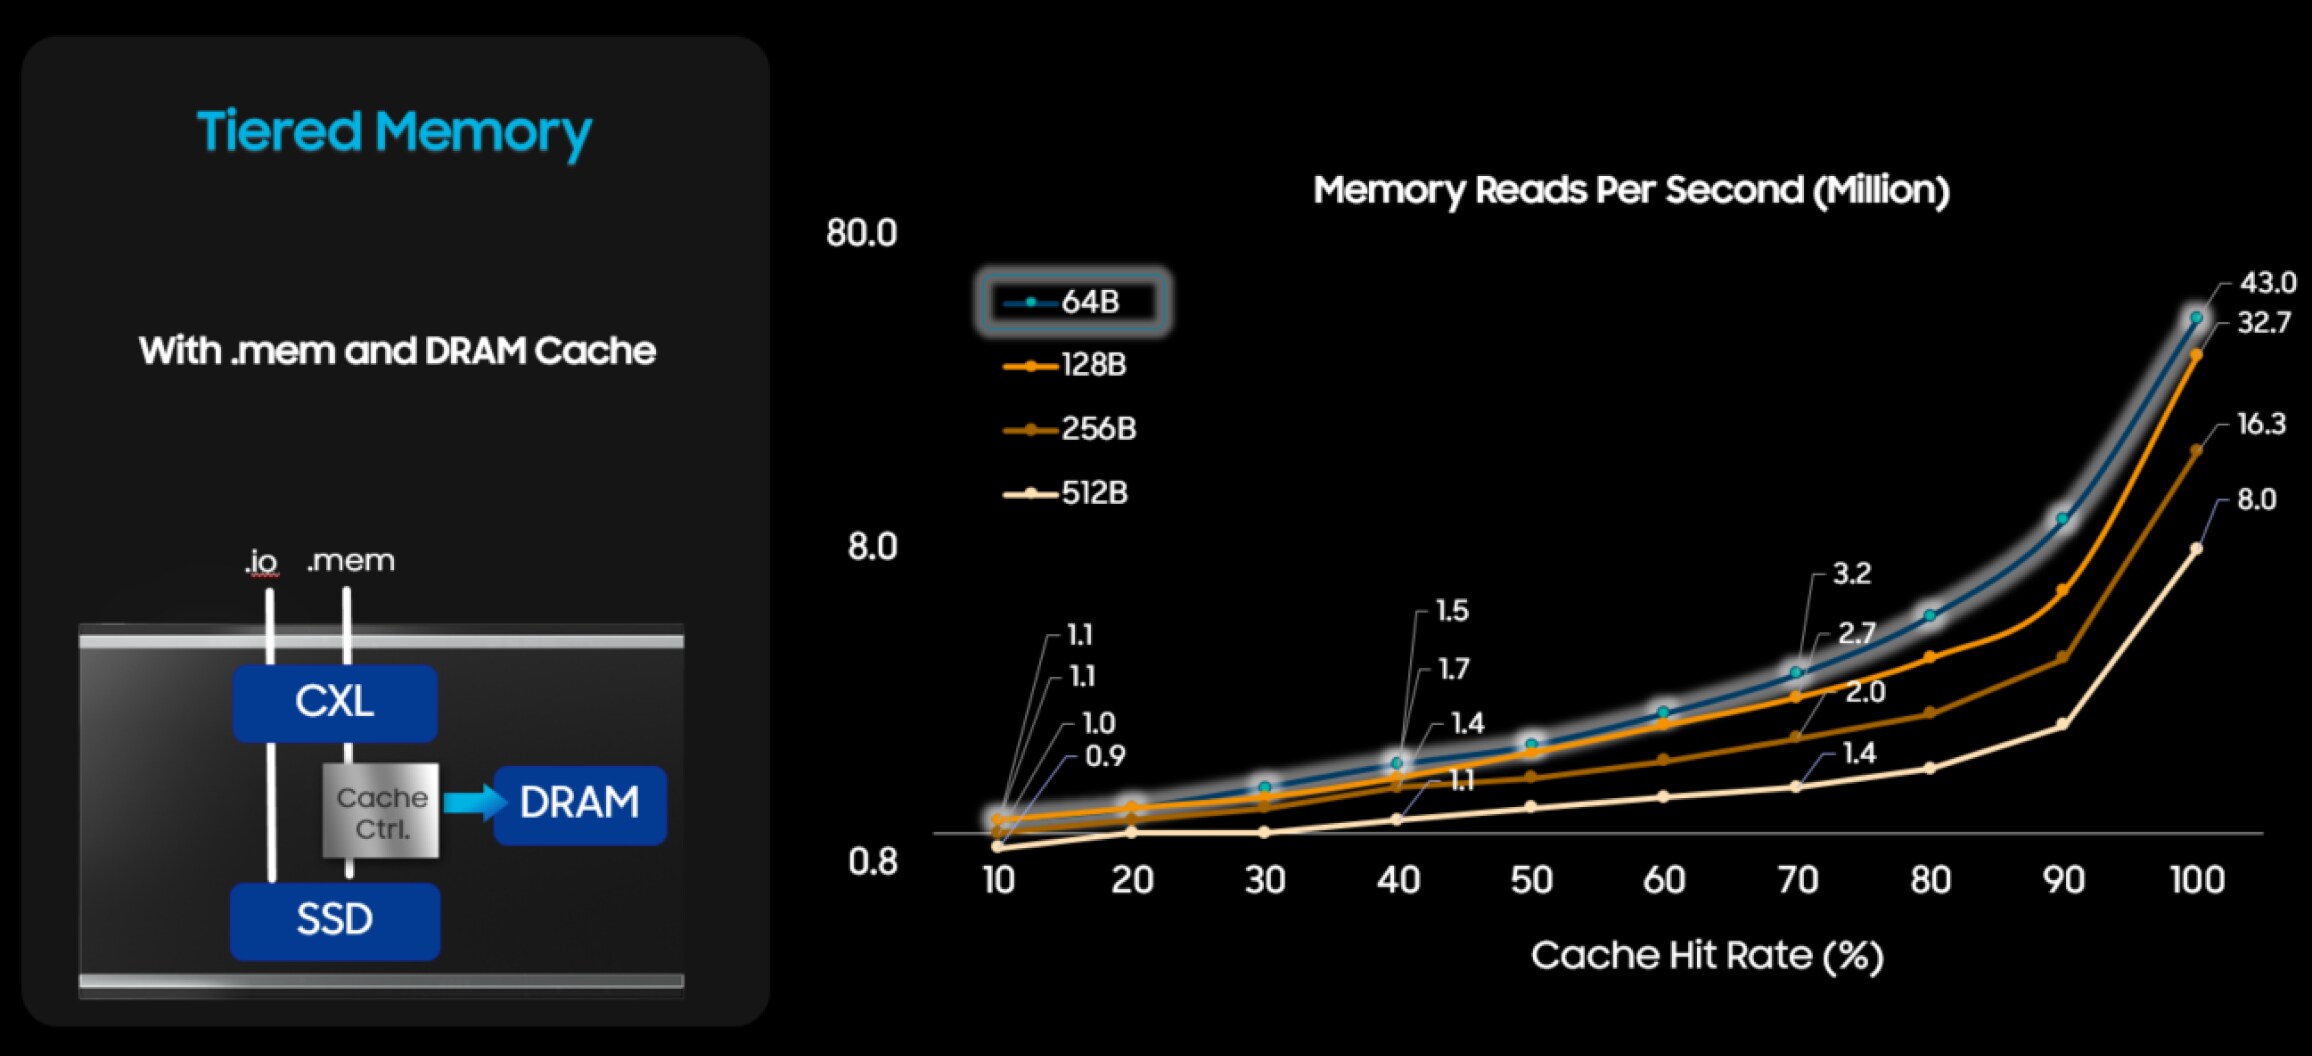 Tiered Memory Feature